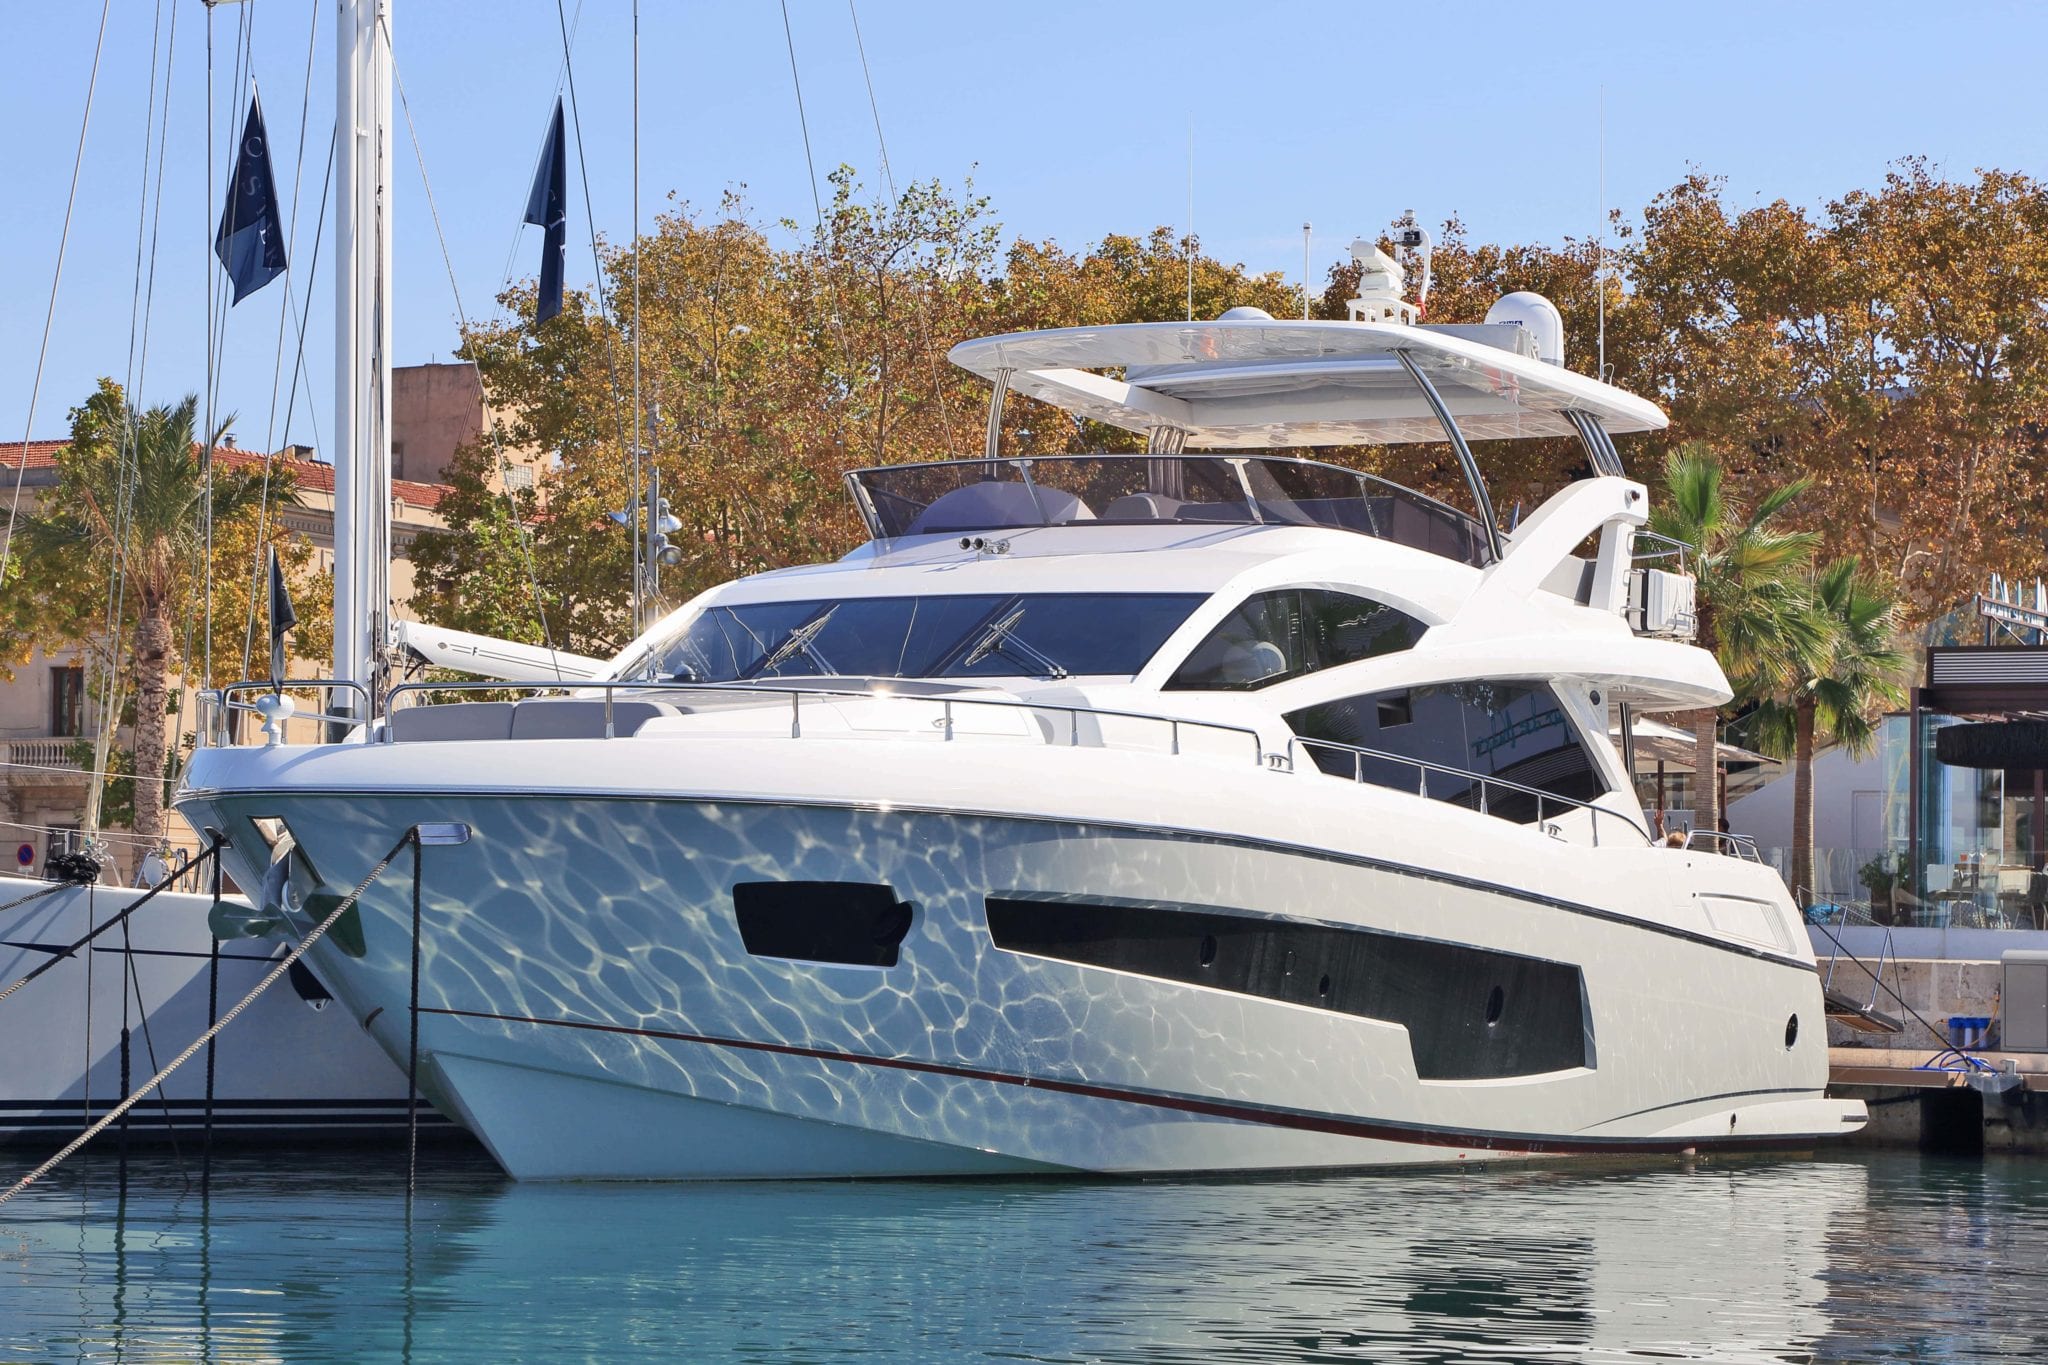 A closer look at the Sunseeker yacht docked up in Palma.